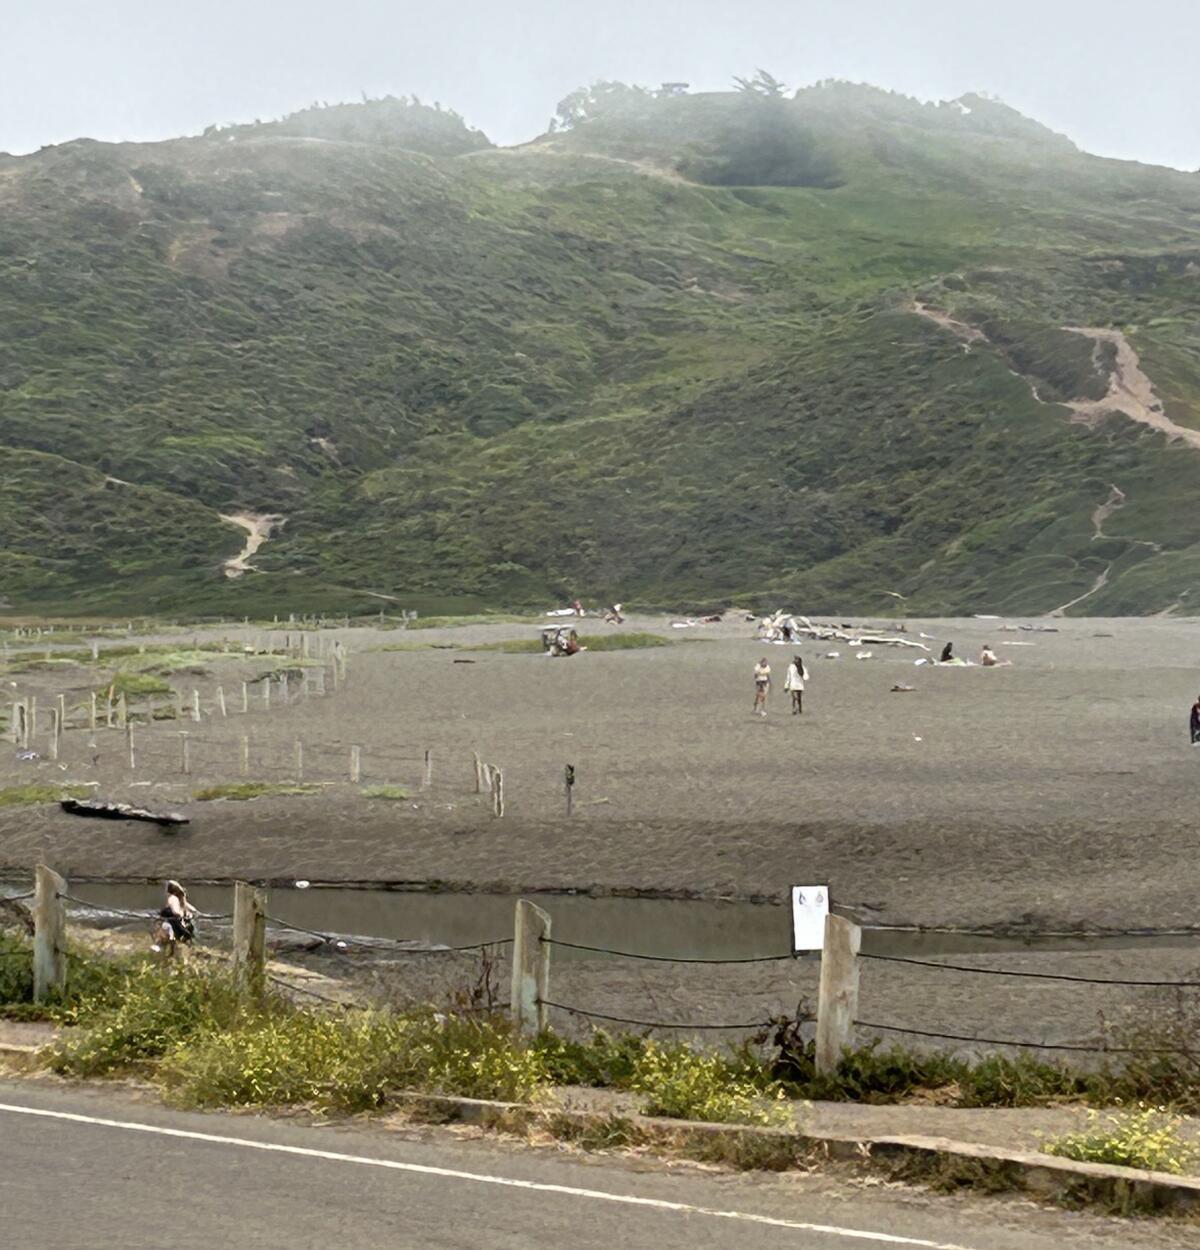 People walk and sit on a beach below a green hill with low fog overhead.